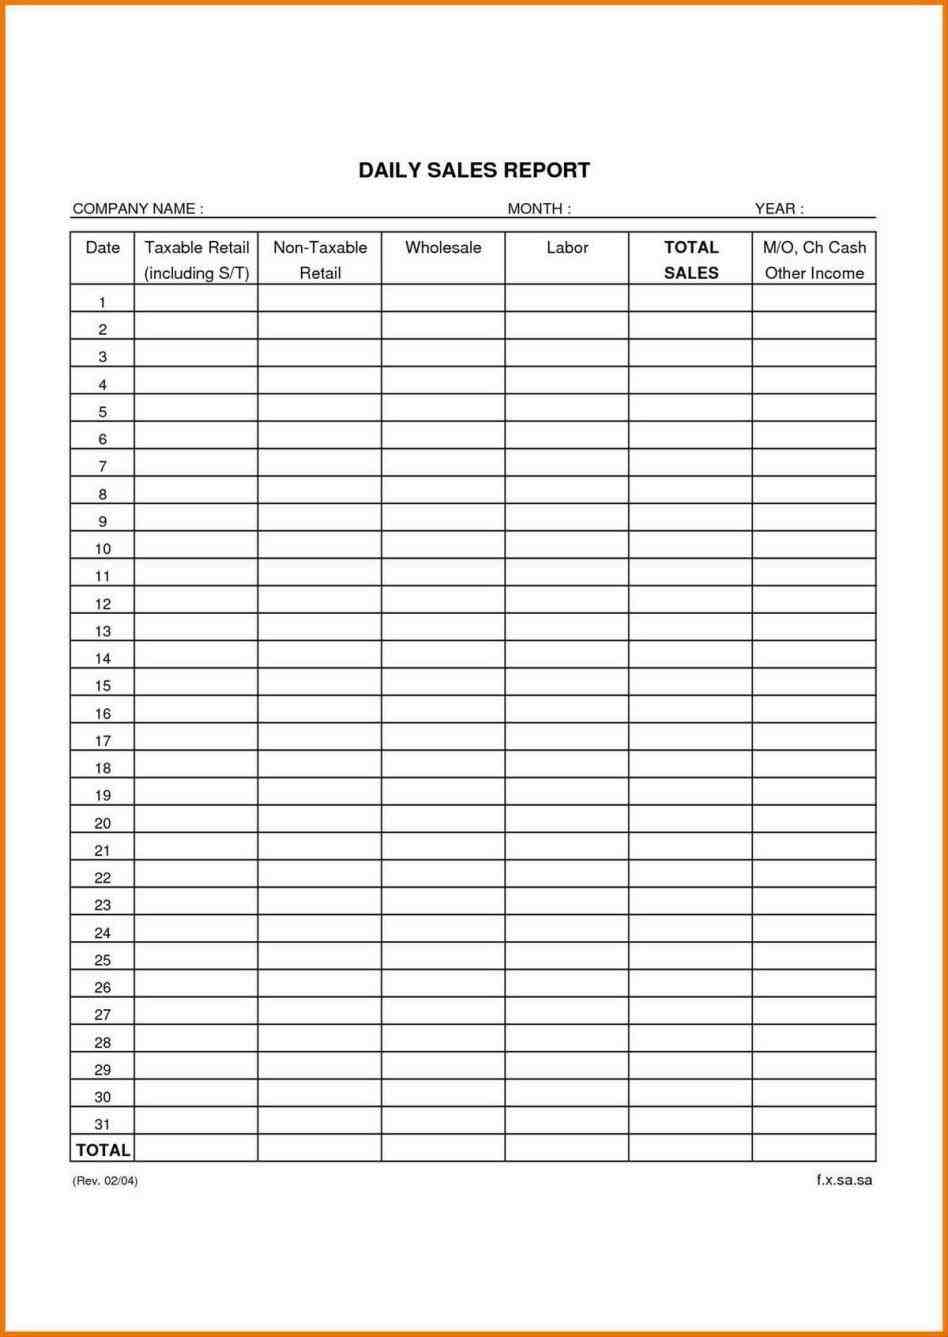 manager template form gse retail sell through created showing retail Daily Revenue Spreadsheet sales and sell through report created template